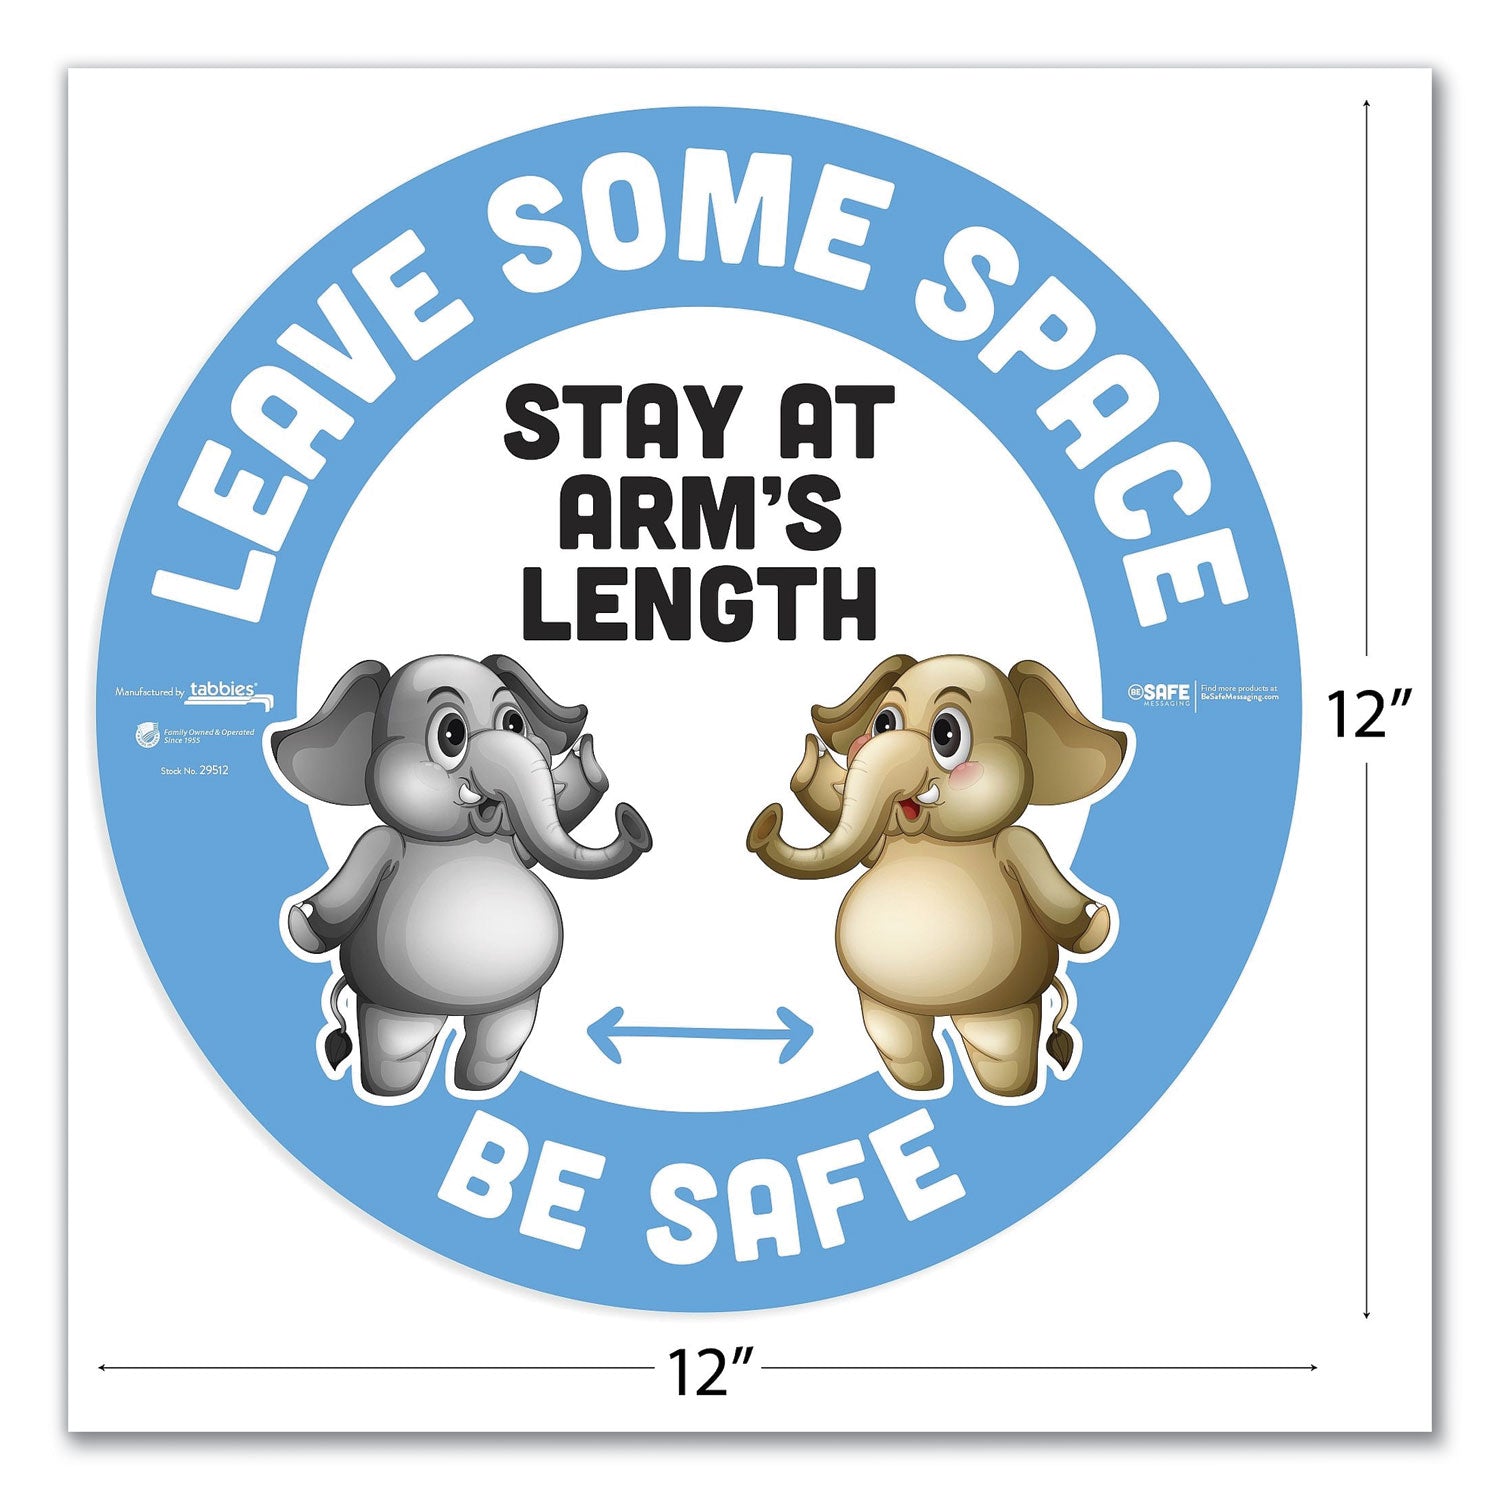 besafe-messaging-education-floor-signs-leave-some-space;-stay-at-arms-length;-be-safe-12-dia-white-blue-6-pack_tab29512 - 2